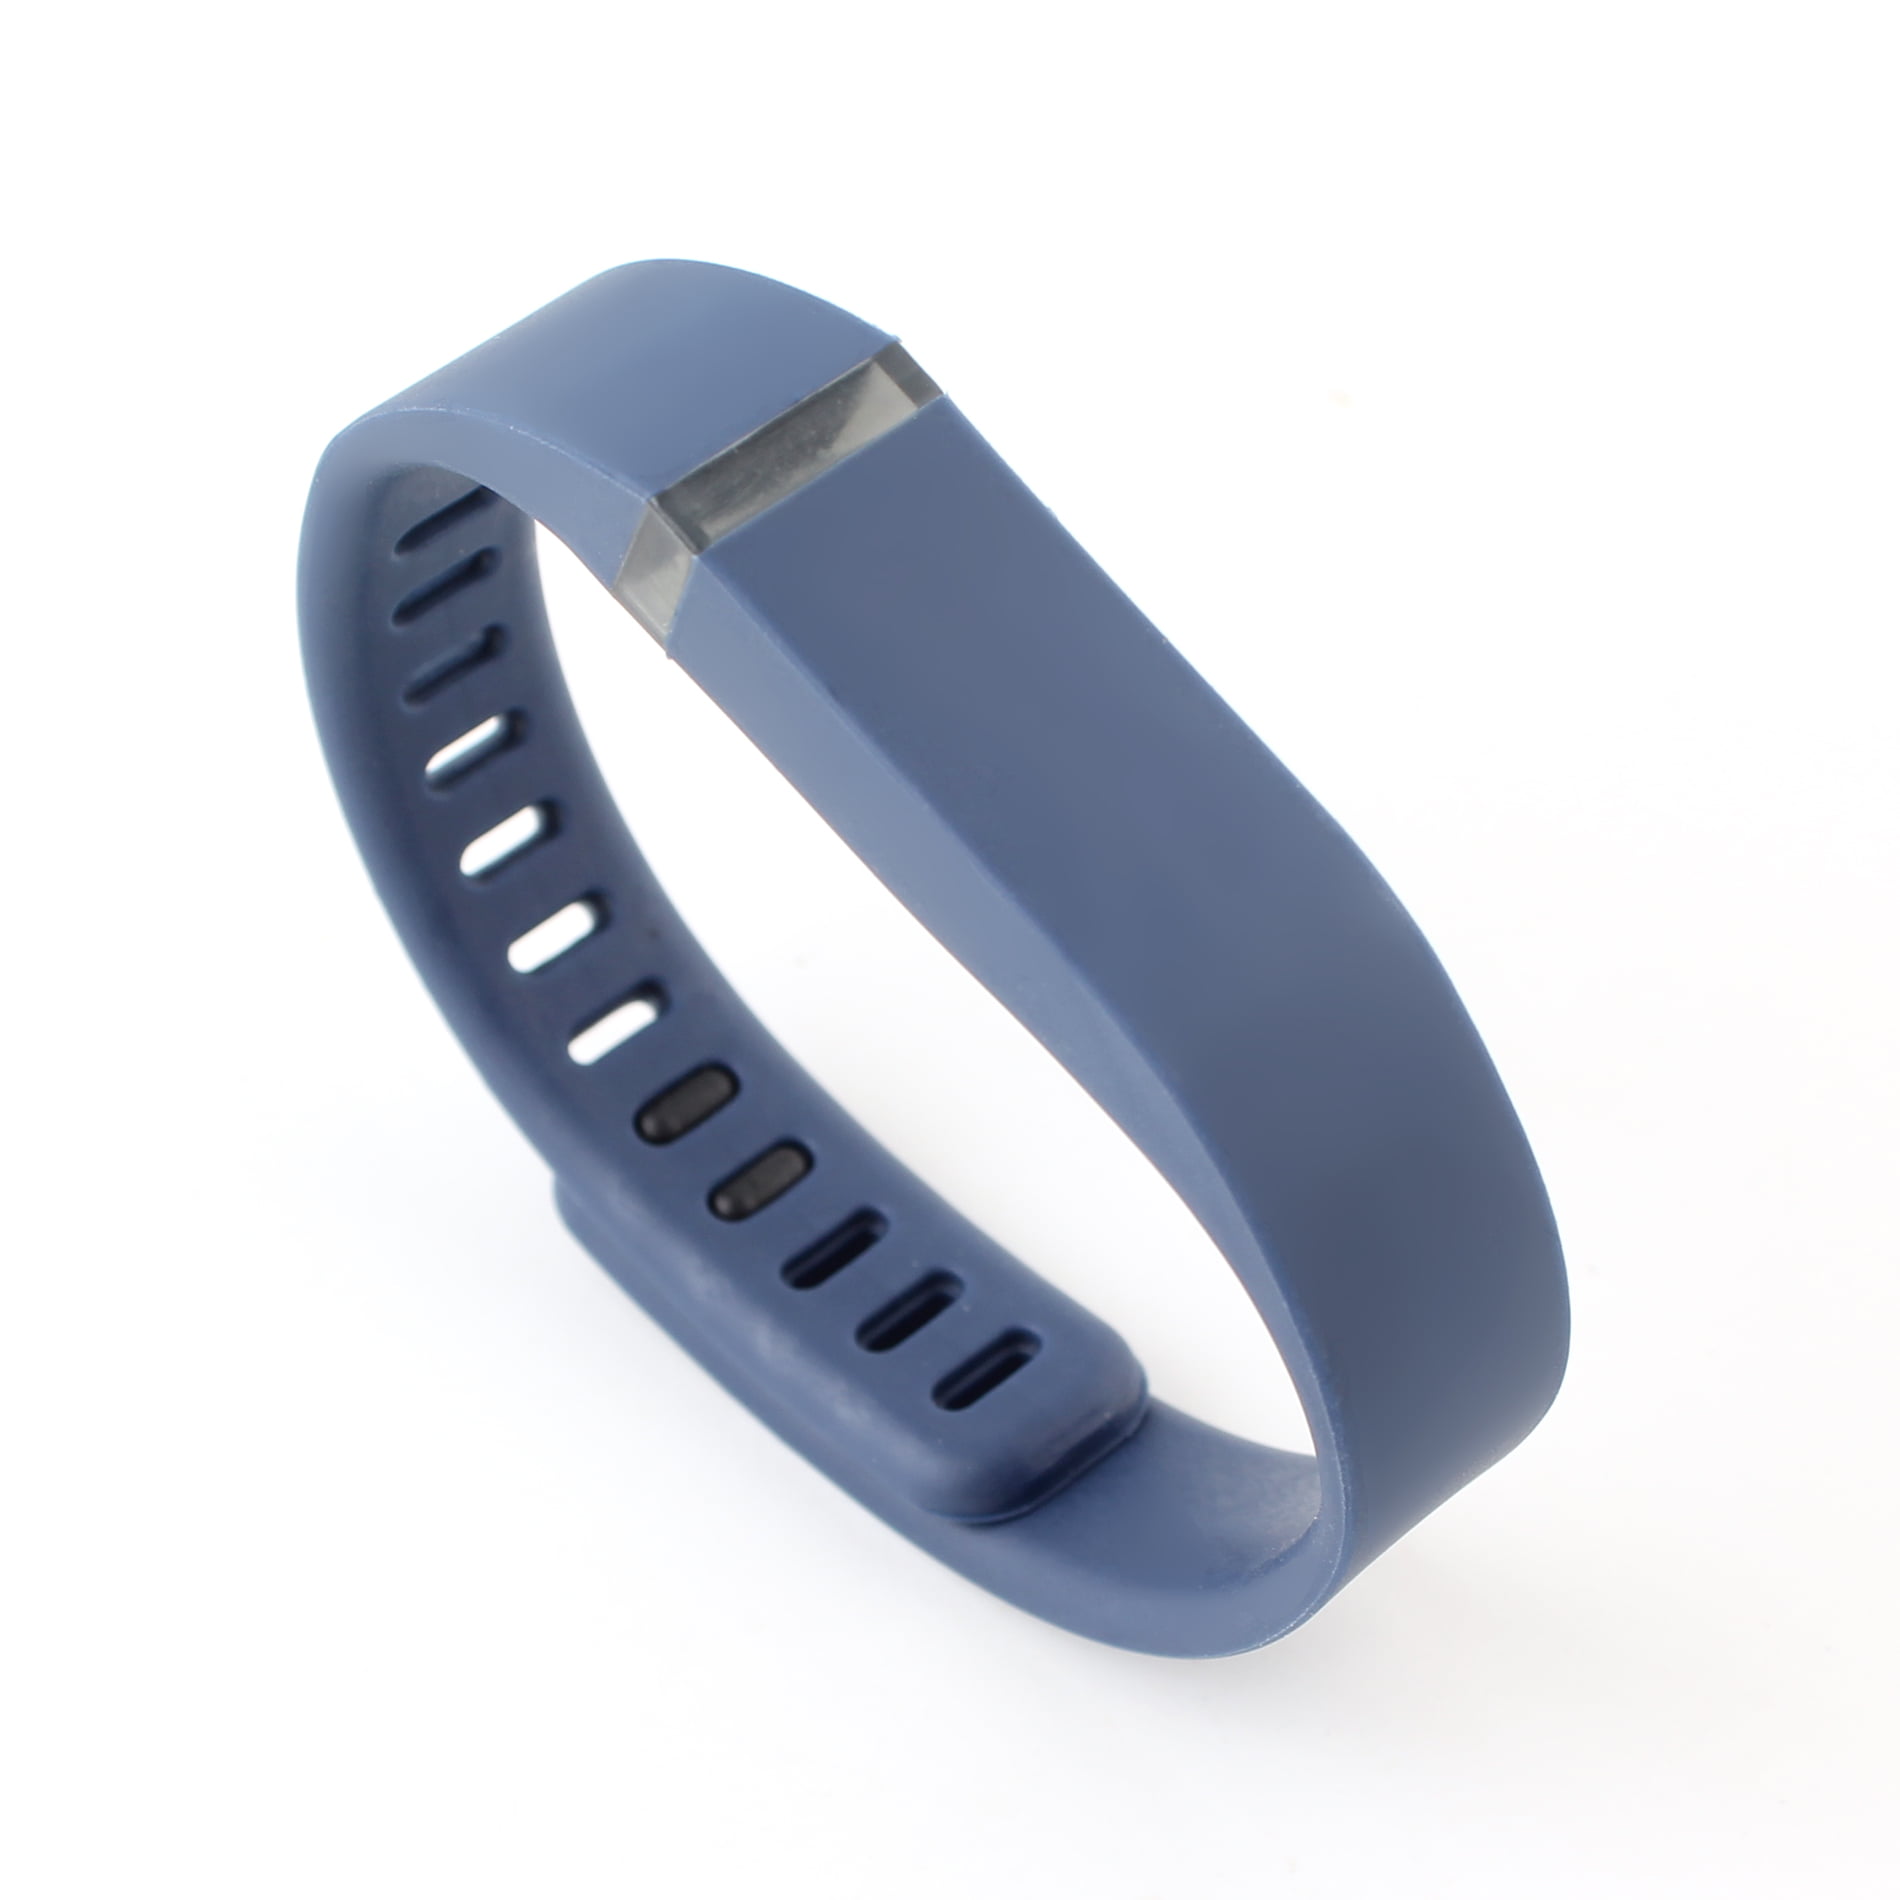 Navy Fashion Replacement Wristband Bracelet Clasp Fits for Fitbit Flex ...